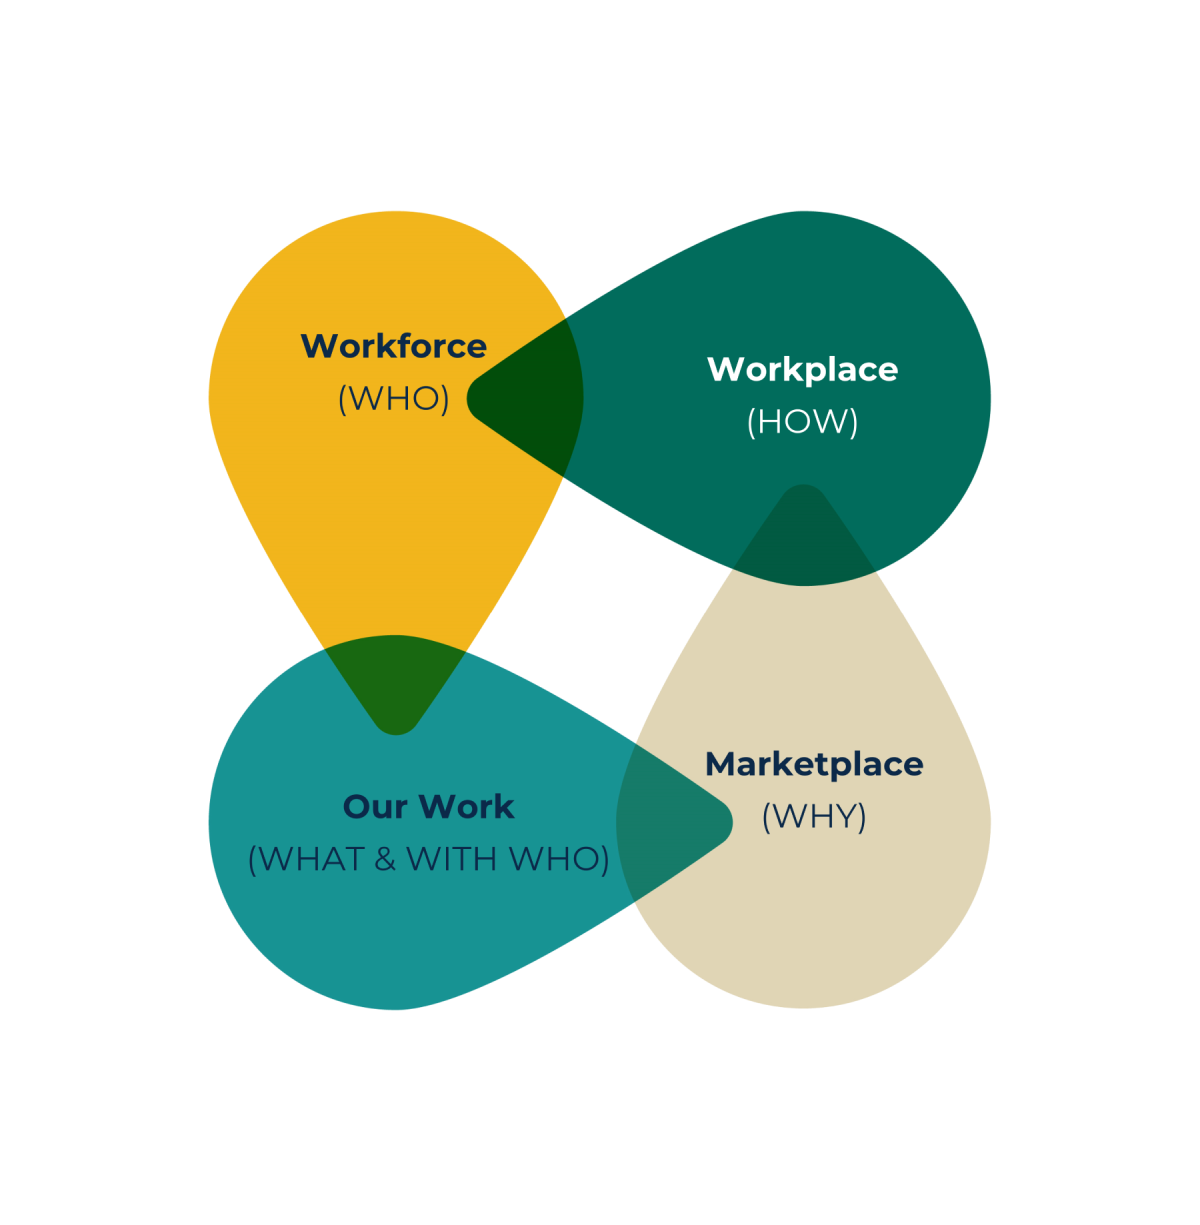 Our interconnected four pillars: workforce, workplace, our work, marketplace